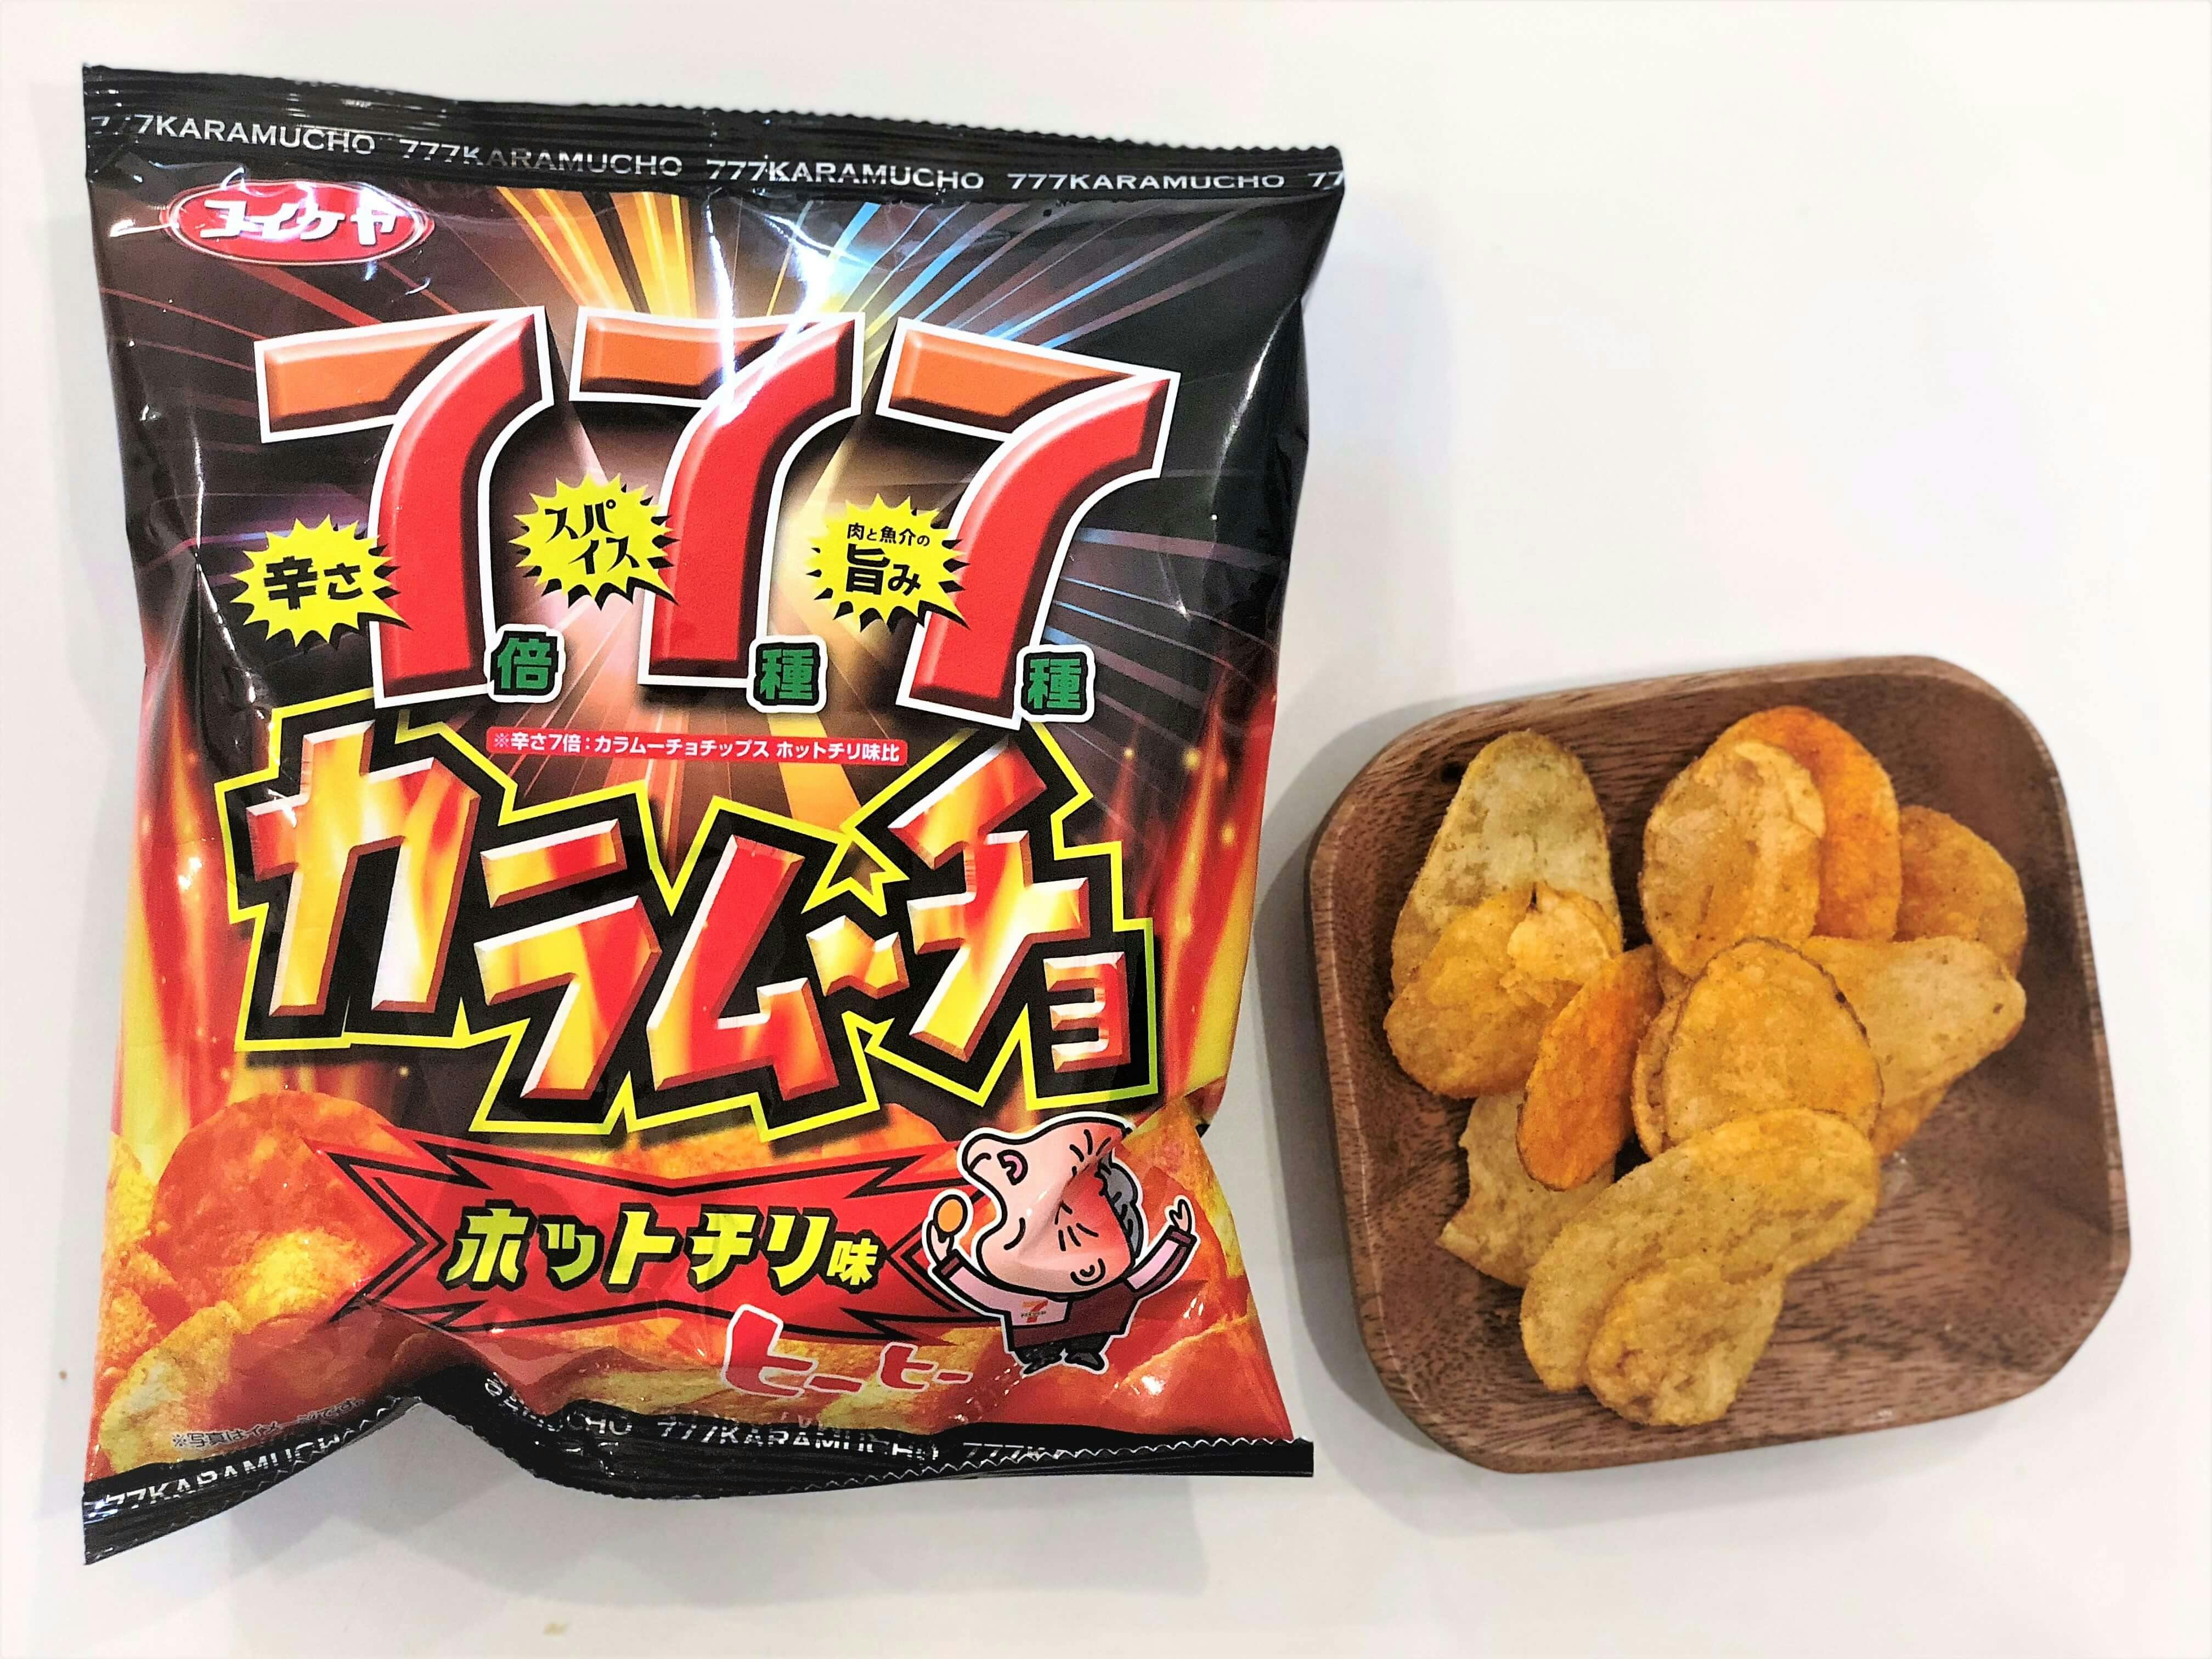 Seven Eleven Japan Celebrates 7/11 With GIANT Japanese Snacks